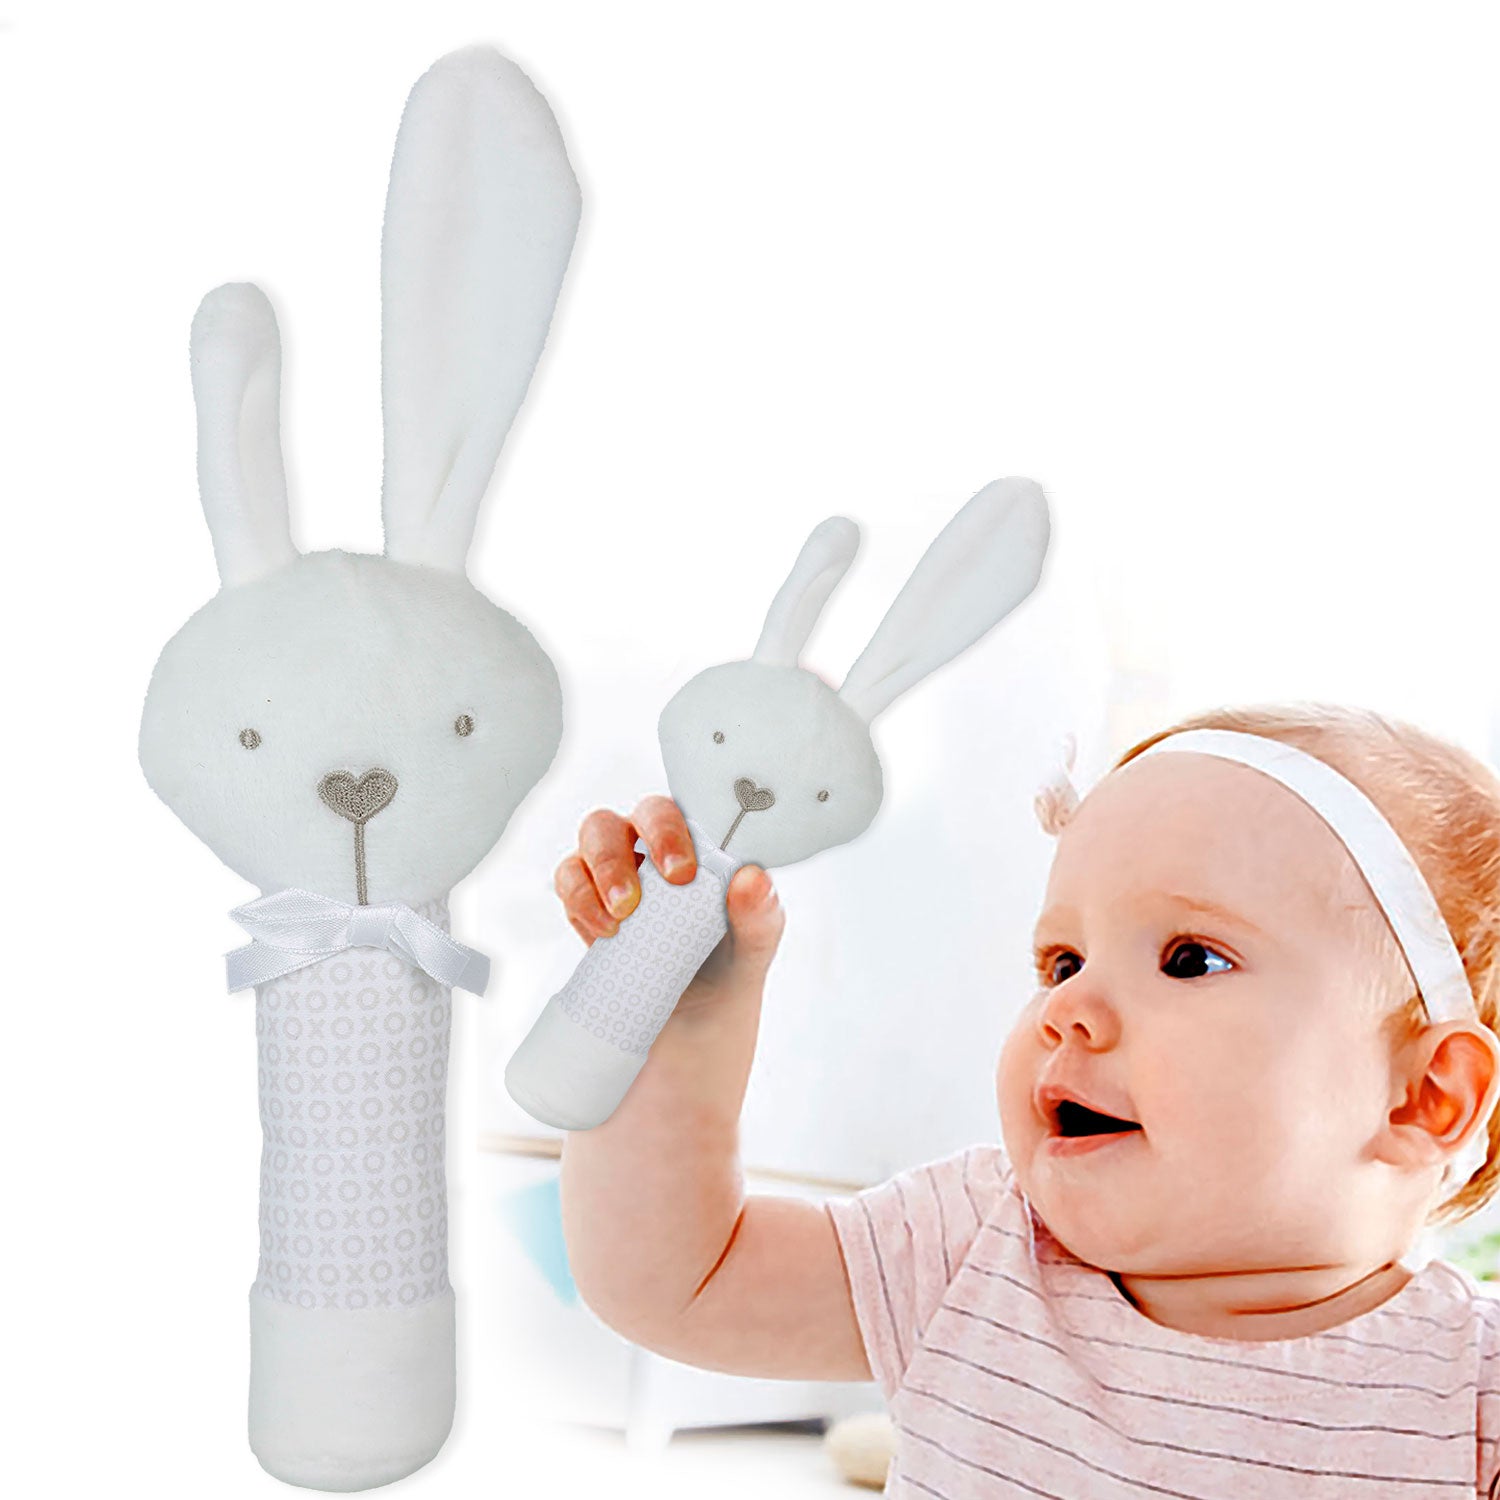 Baby Moo Cuddle Bunny Squeaker Sound Handheld Rattle Toy - White